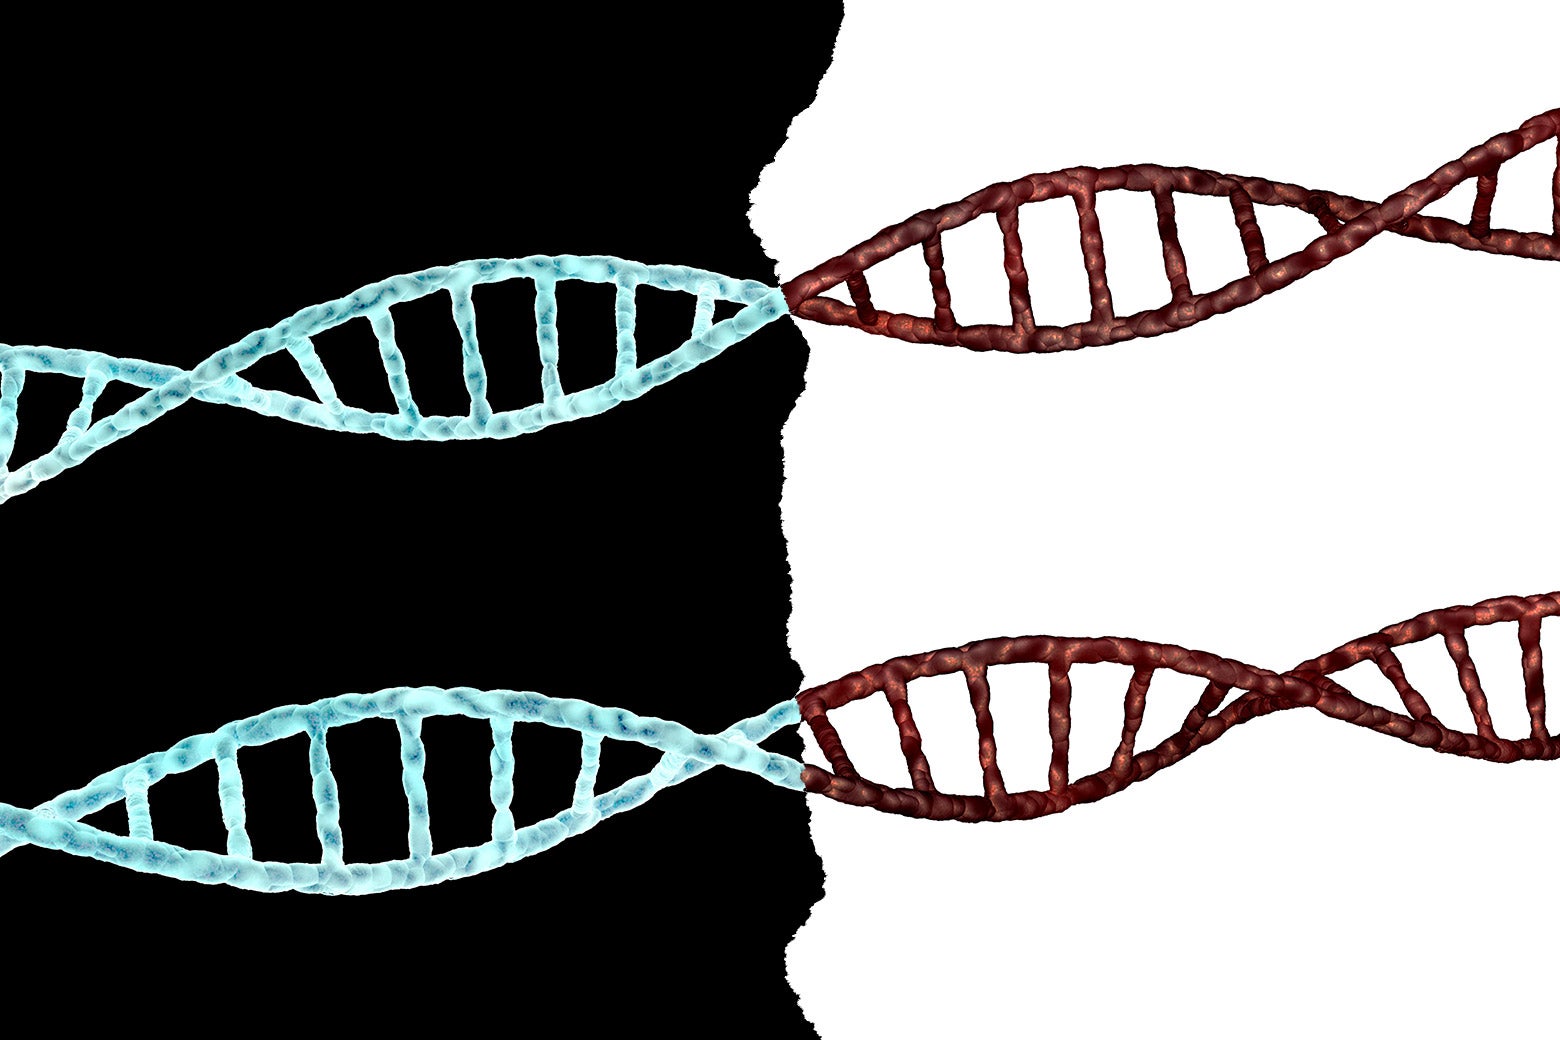 DNA strands laid out across a black and white divide.